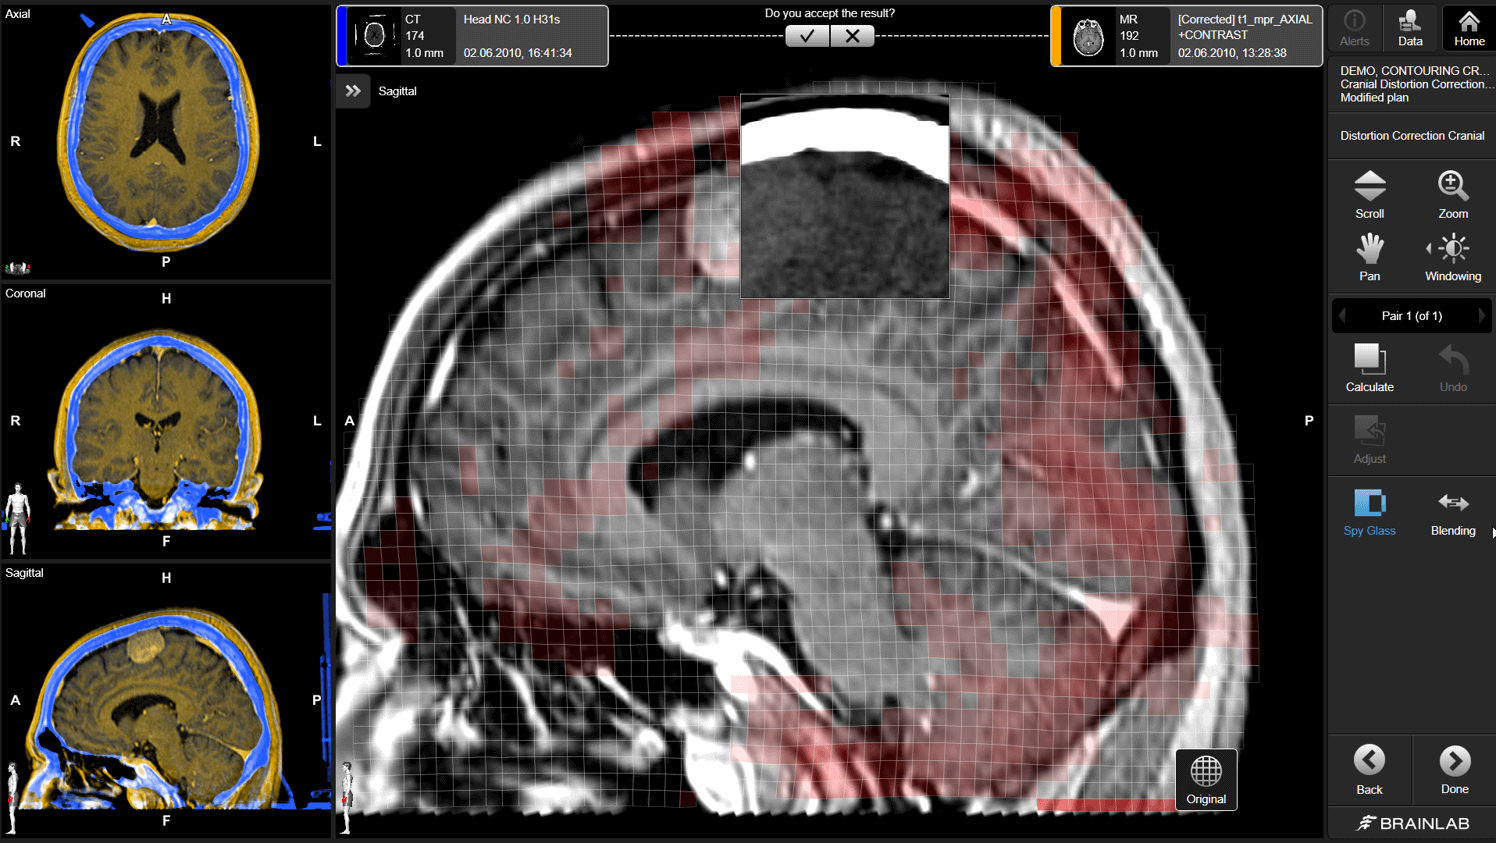 Software screen of Brainlab Elements Distortion Correction software which shows a fused MR and CT image of a brain during correction of distortions during that image fusion.